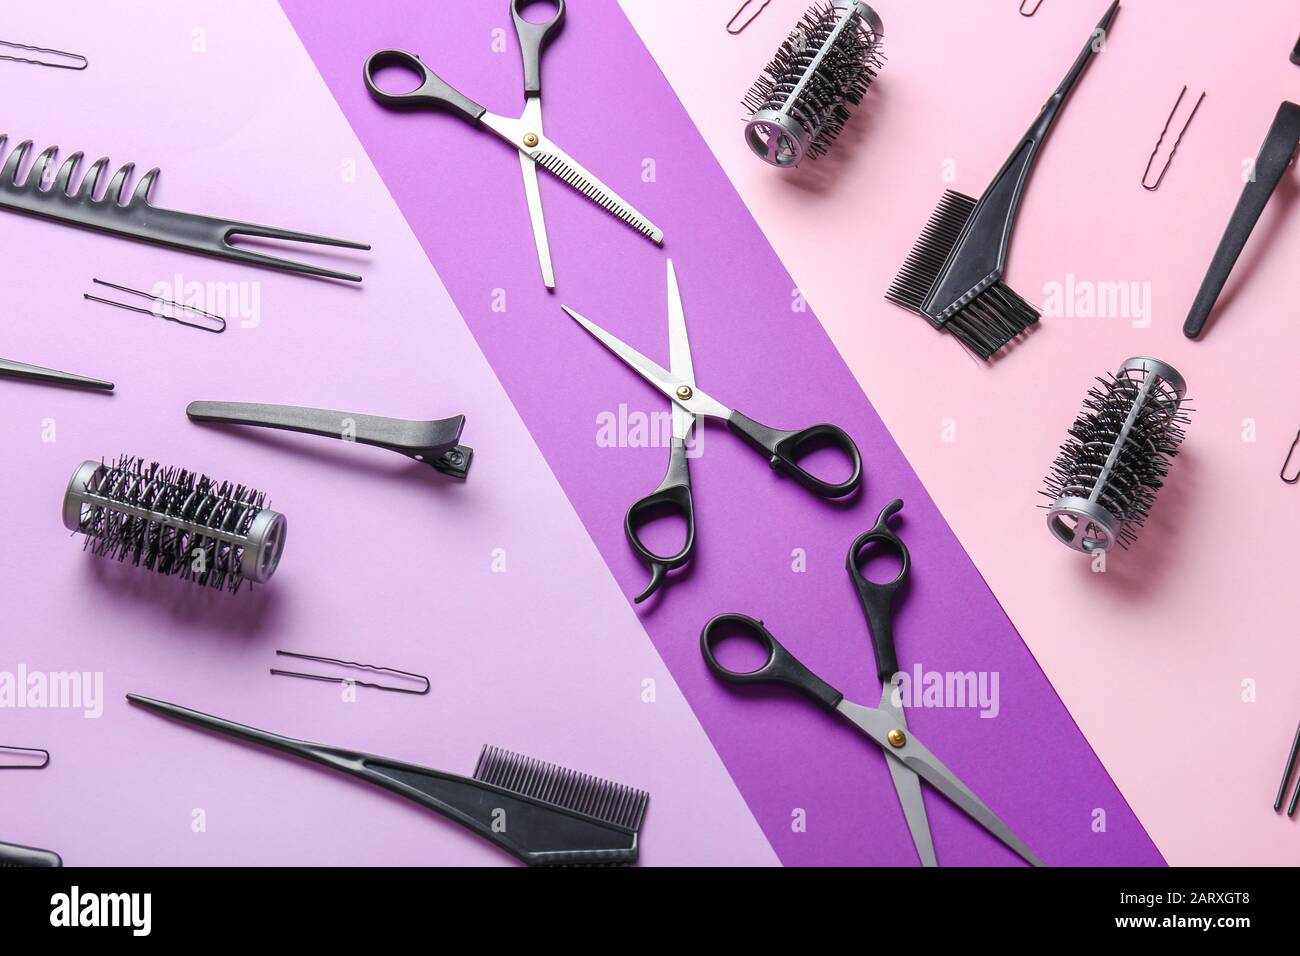 Set Of Hairdresser Tools On Color Background Stock Photo